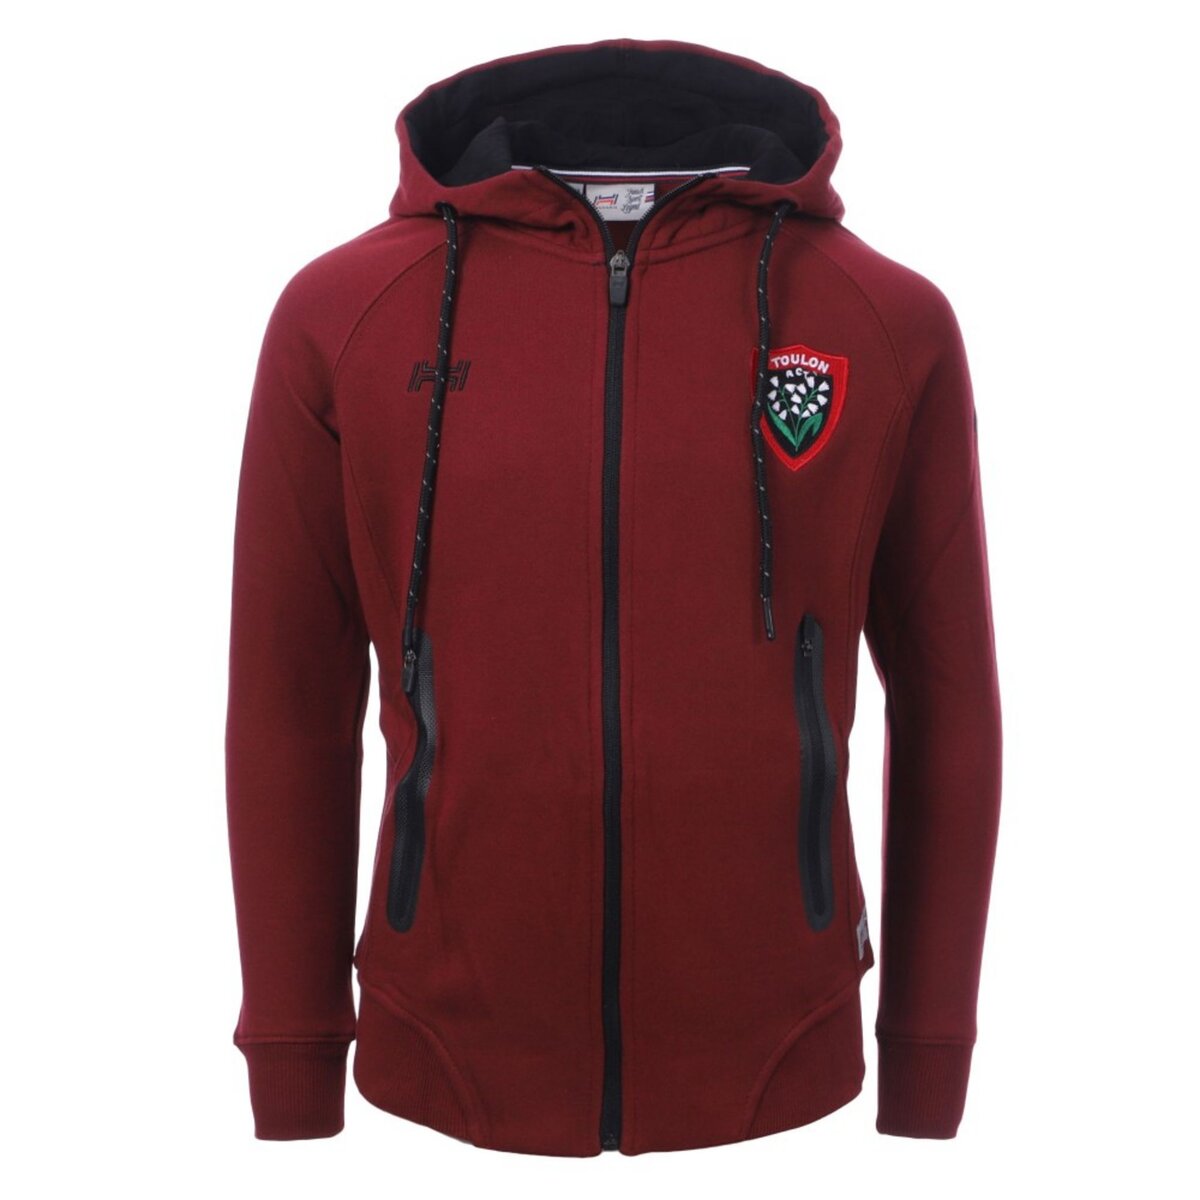 HUNGARIA Sweat Rugby Club Toulon bordeaux enfant Hungaria Full Zip